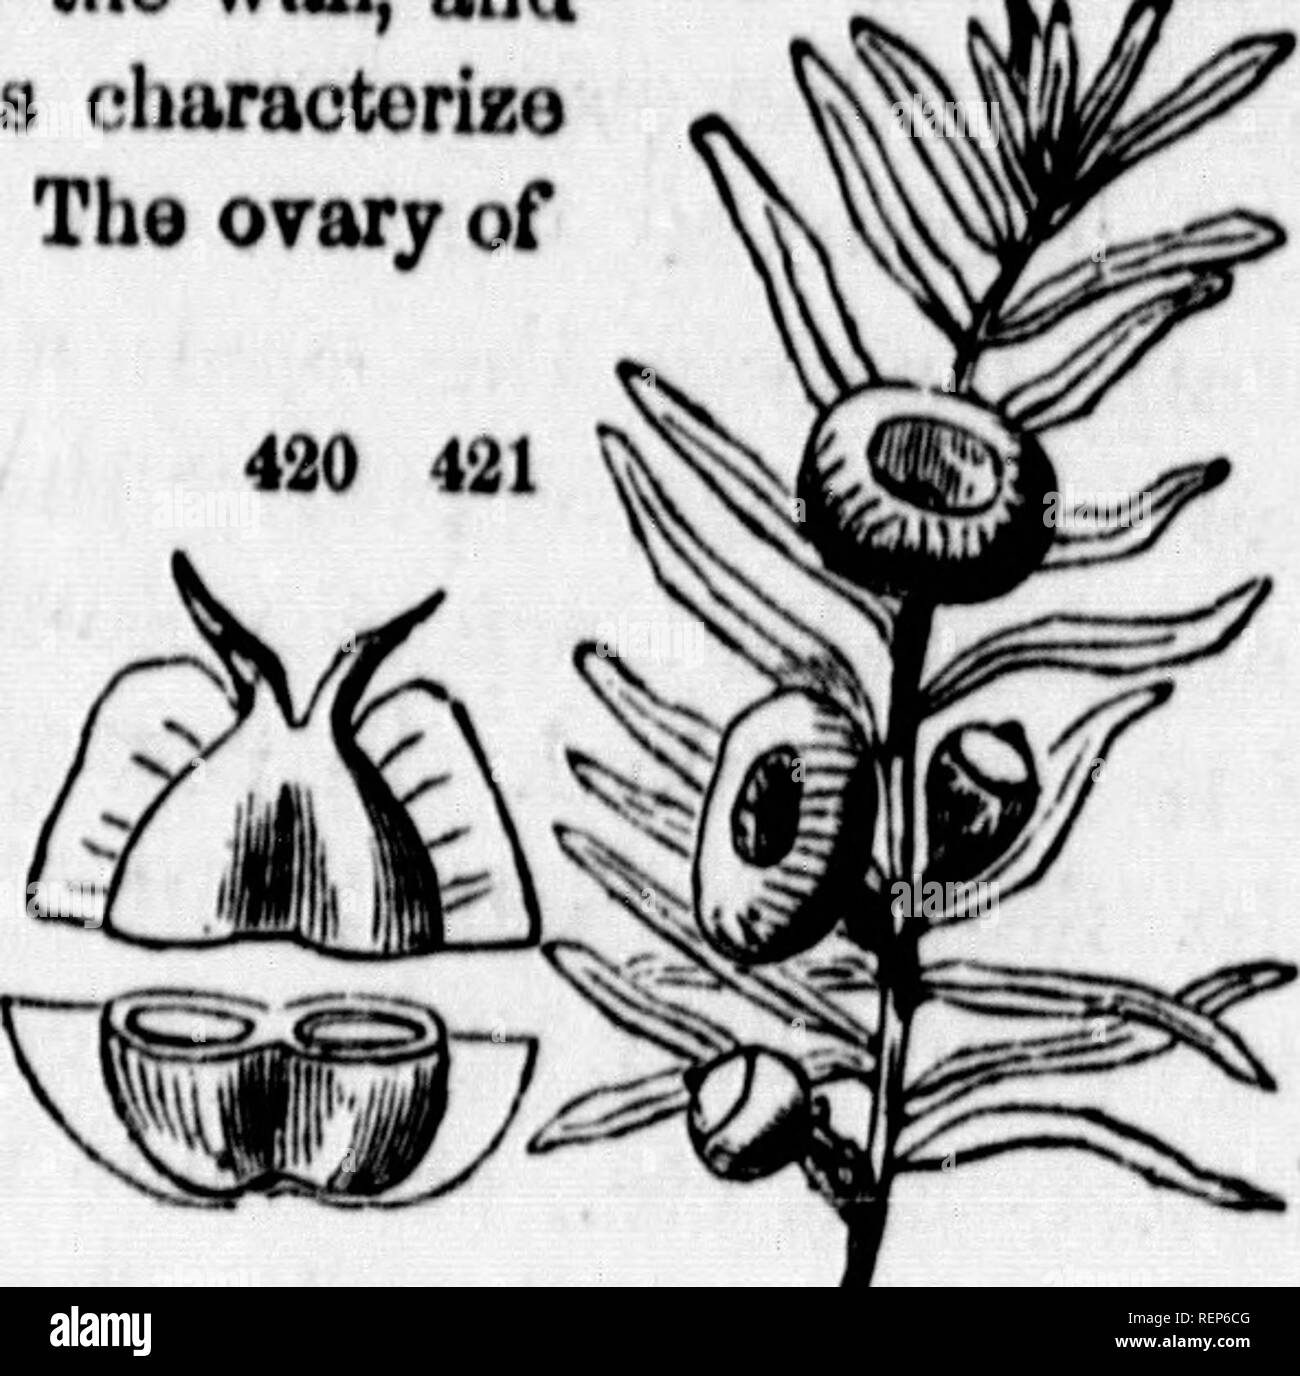 . Class-book of botany [microform] : being outlines of the structure, physiology, and classification of plants : with a flora of the United States and Canada. Botany; Botany; Plants; Plants; Botanique; Botanique; Plantes; Botanique. 418, Section of tho ovary of nn ncorn, S-cellcd «.ovi,l..f1 Aon a n 2-co!le,l,2.«vulo&lt;I. 419, VerticaUcctlon i.f the an c In f t S'v 1 Ixu&quot;? *''&quot;'&quot;&quot;'' »oon after flowering. 421. N»ked seed of T^x,,Tr . .' ^'orloarp of MIgnlonotte open fleshy pc-ricnr,,. ^*'''&quot; Canadensis, surrounded, not covered by the the birclj is 2-cello,l, 2-ovalod ; Stock Photo